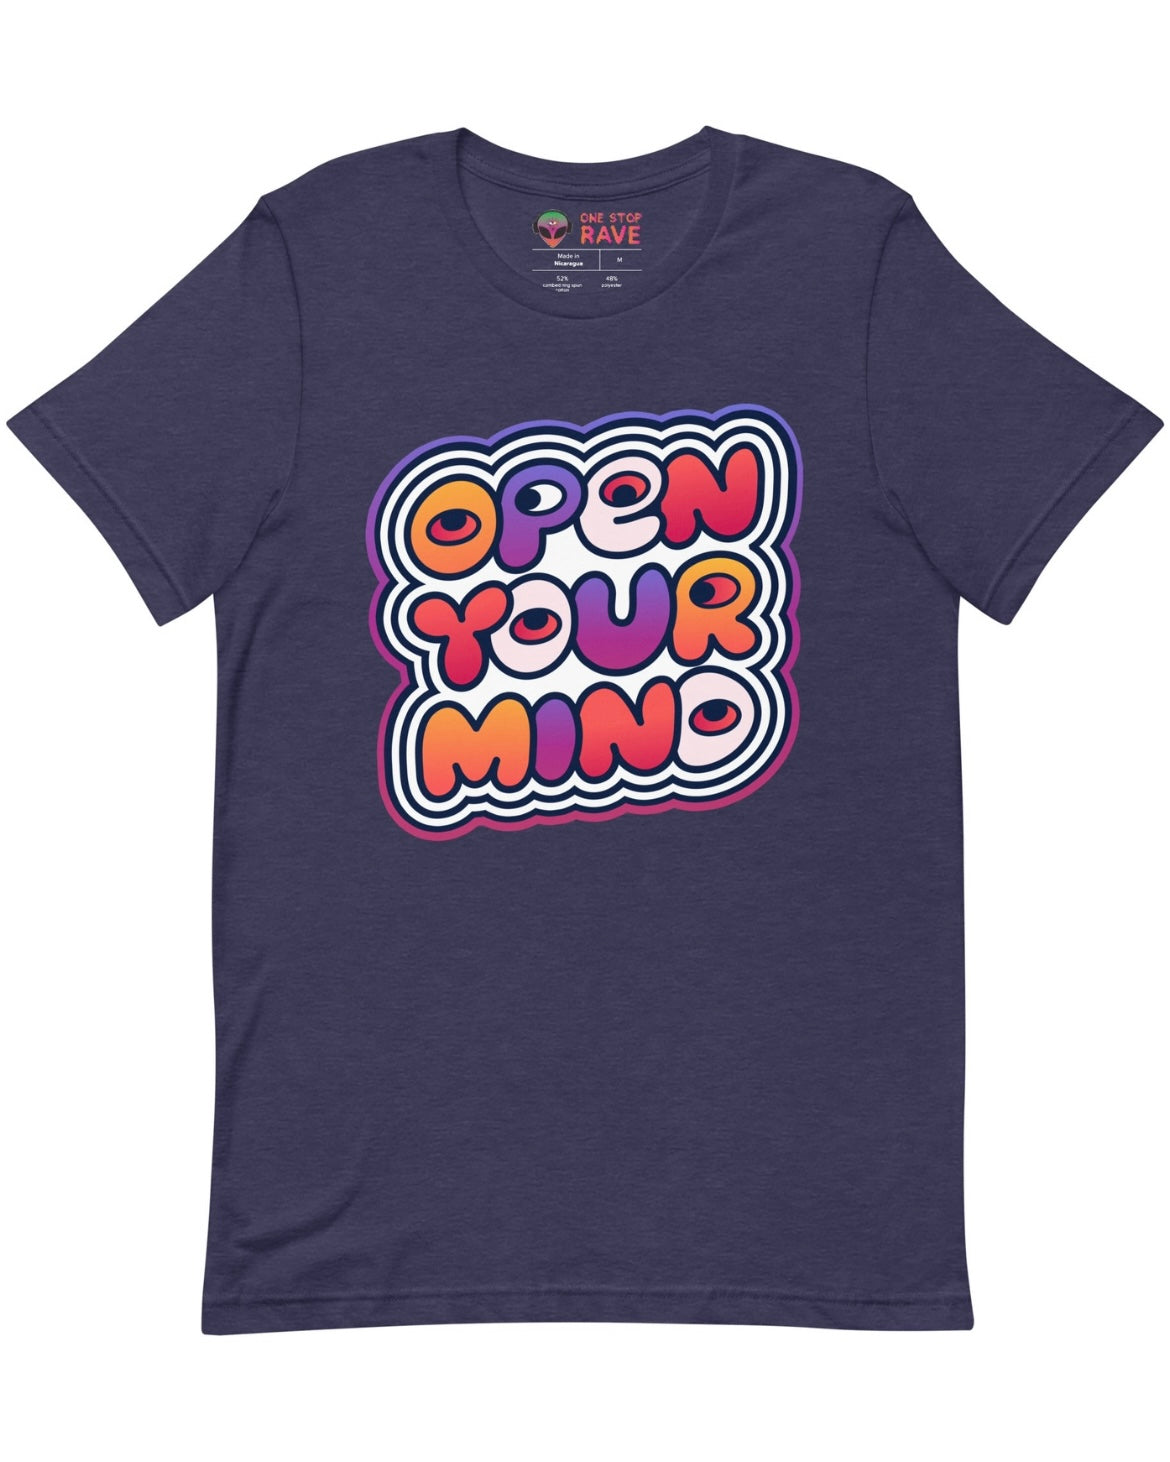 Open Your Mind T-Shirt, T-Shirt, - One Stop Rave